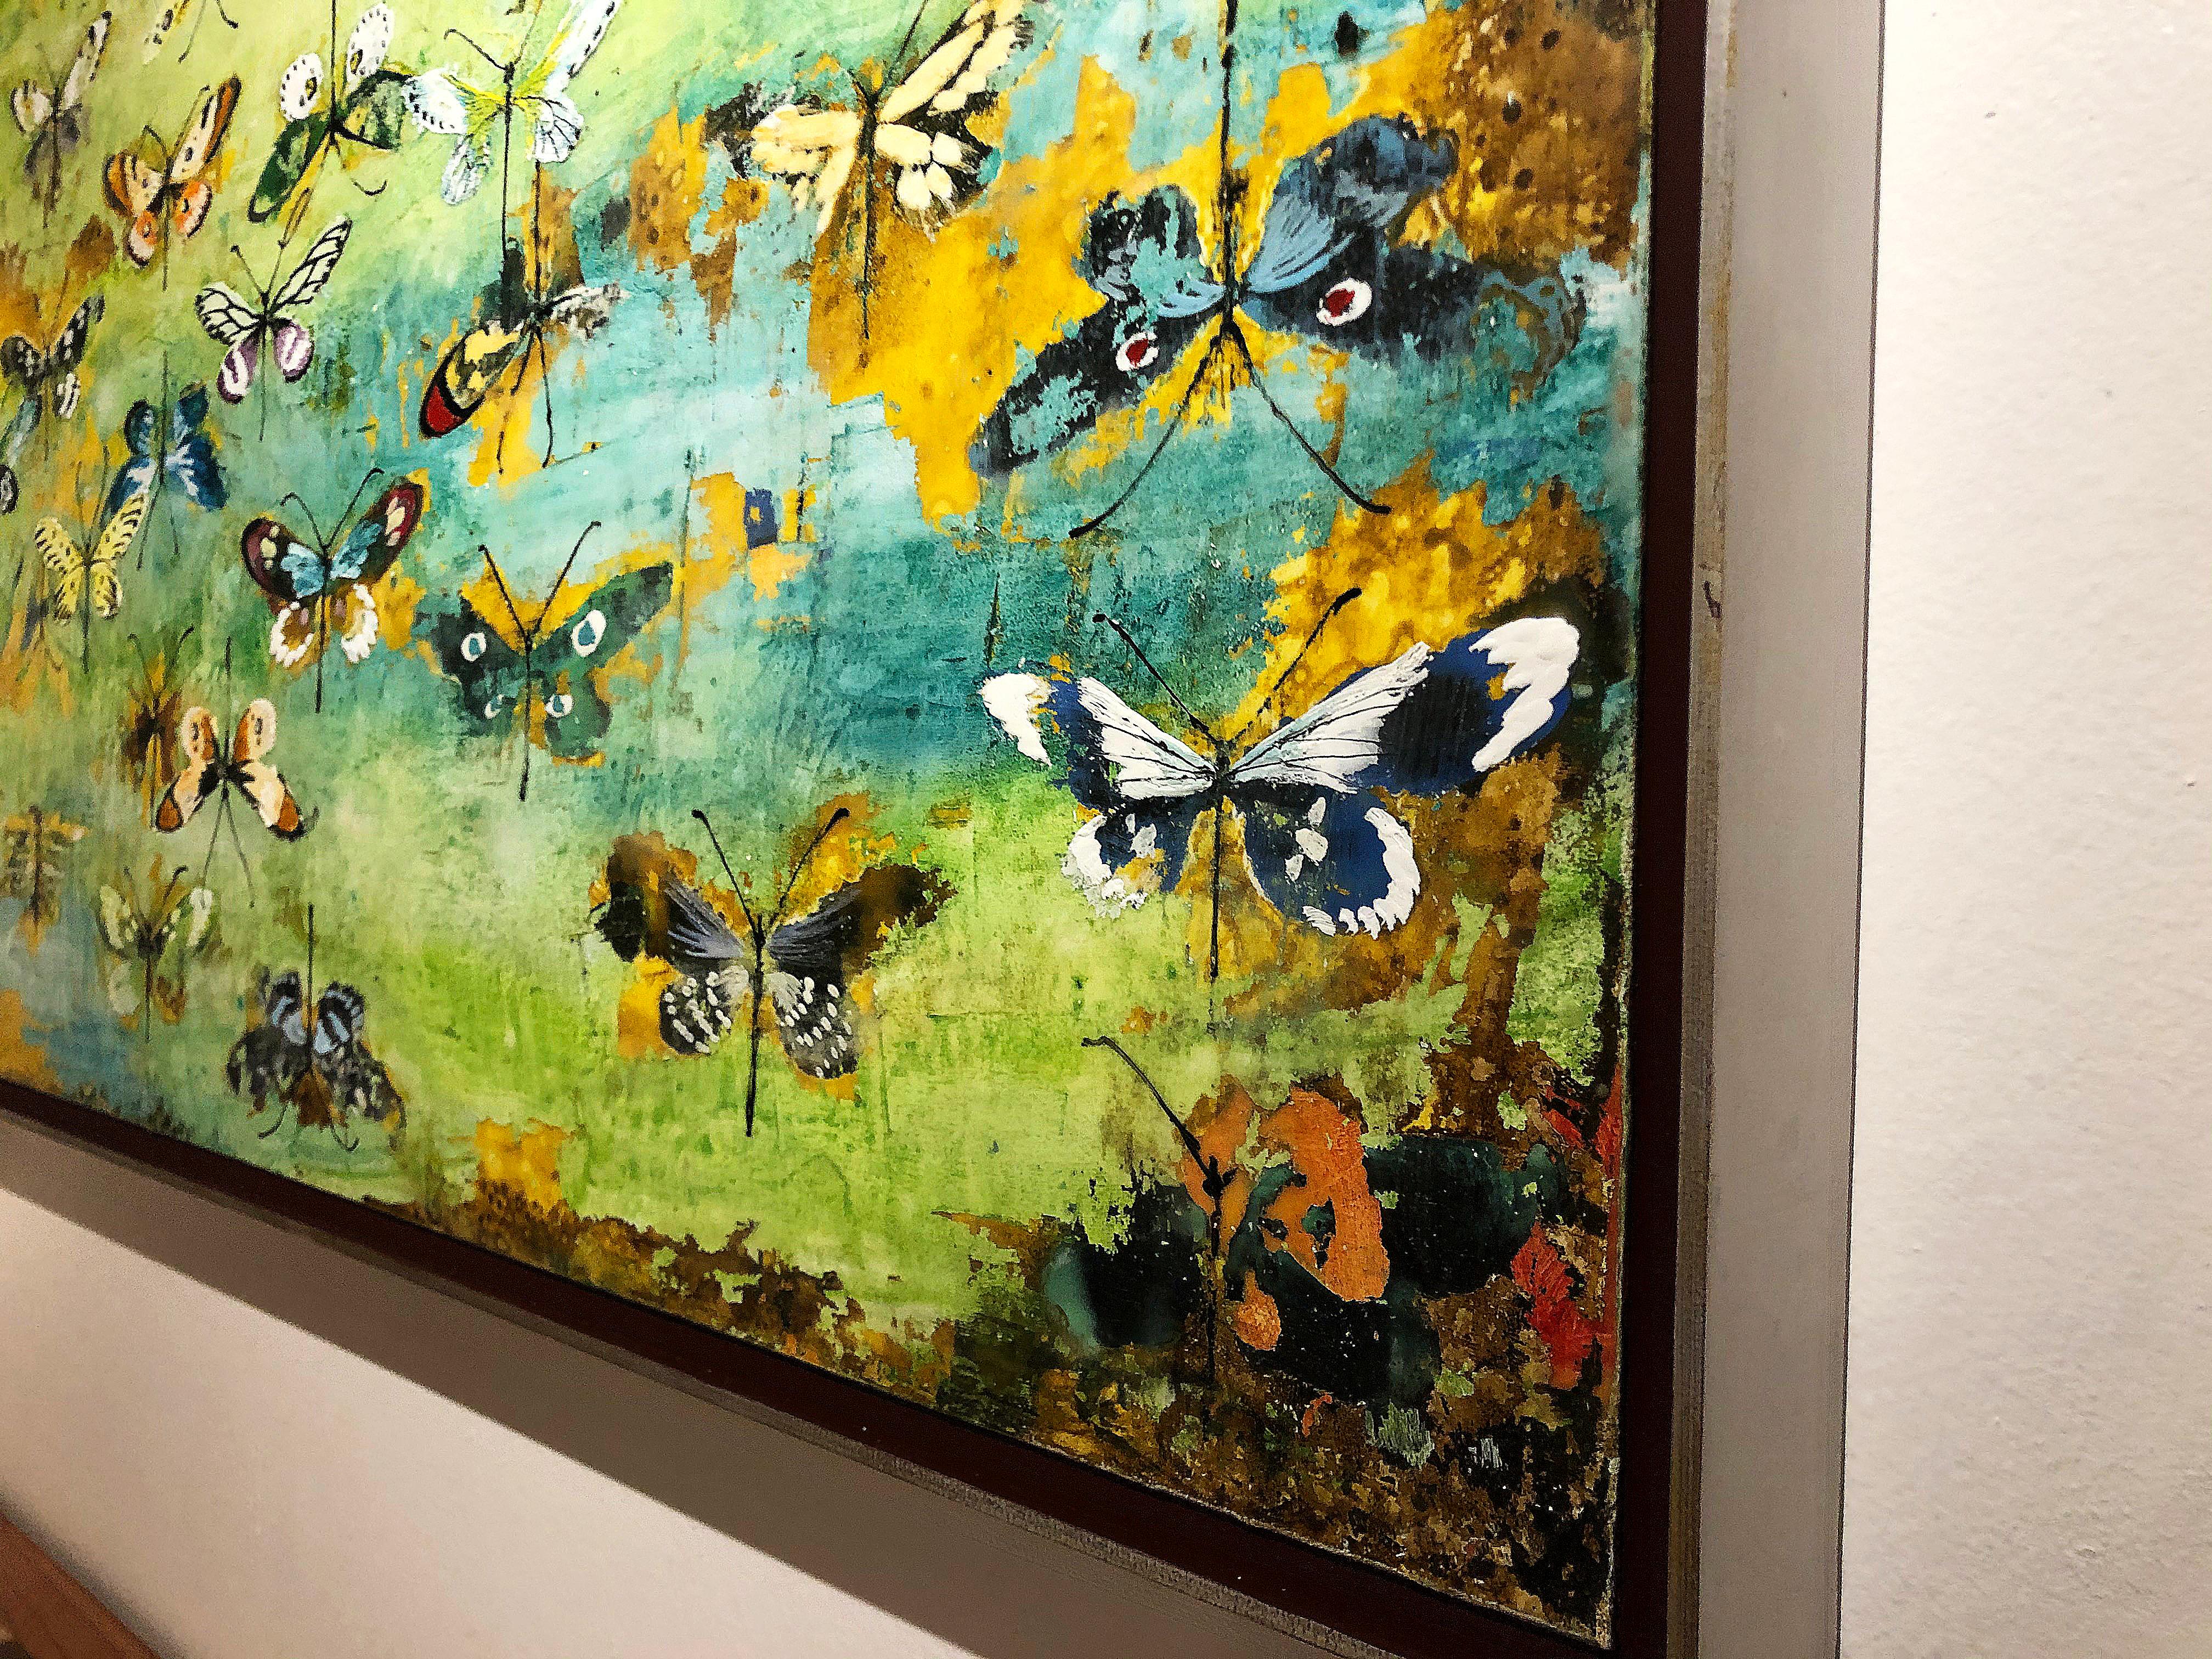 Generations, encaustic and mixed media painting, butterflies, turquoise, yellow - Painting by Chris Reilly